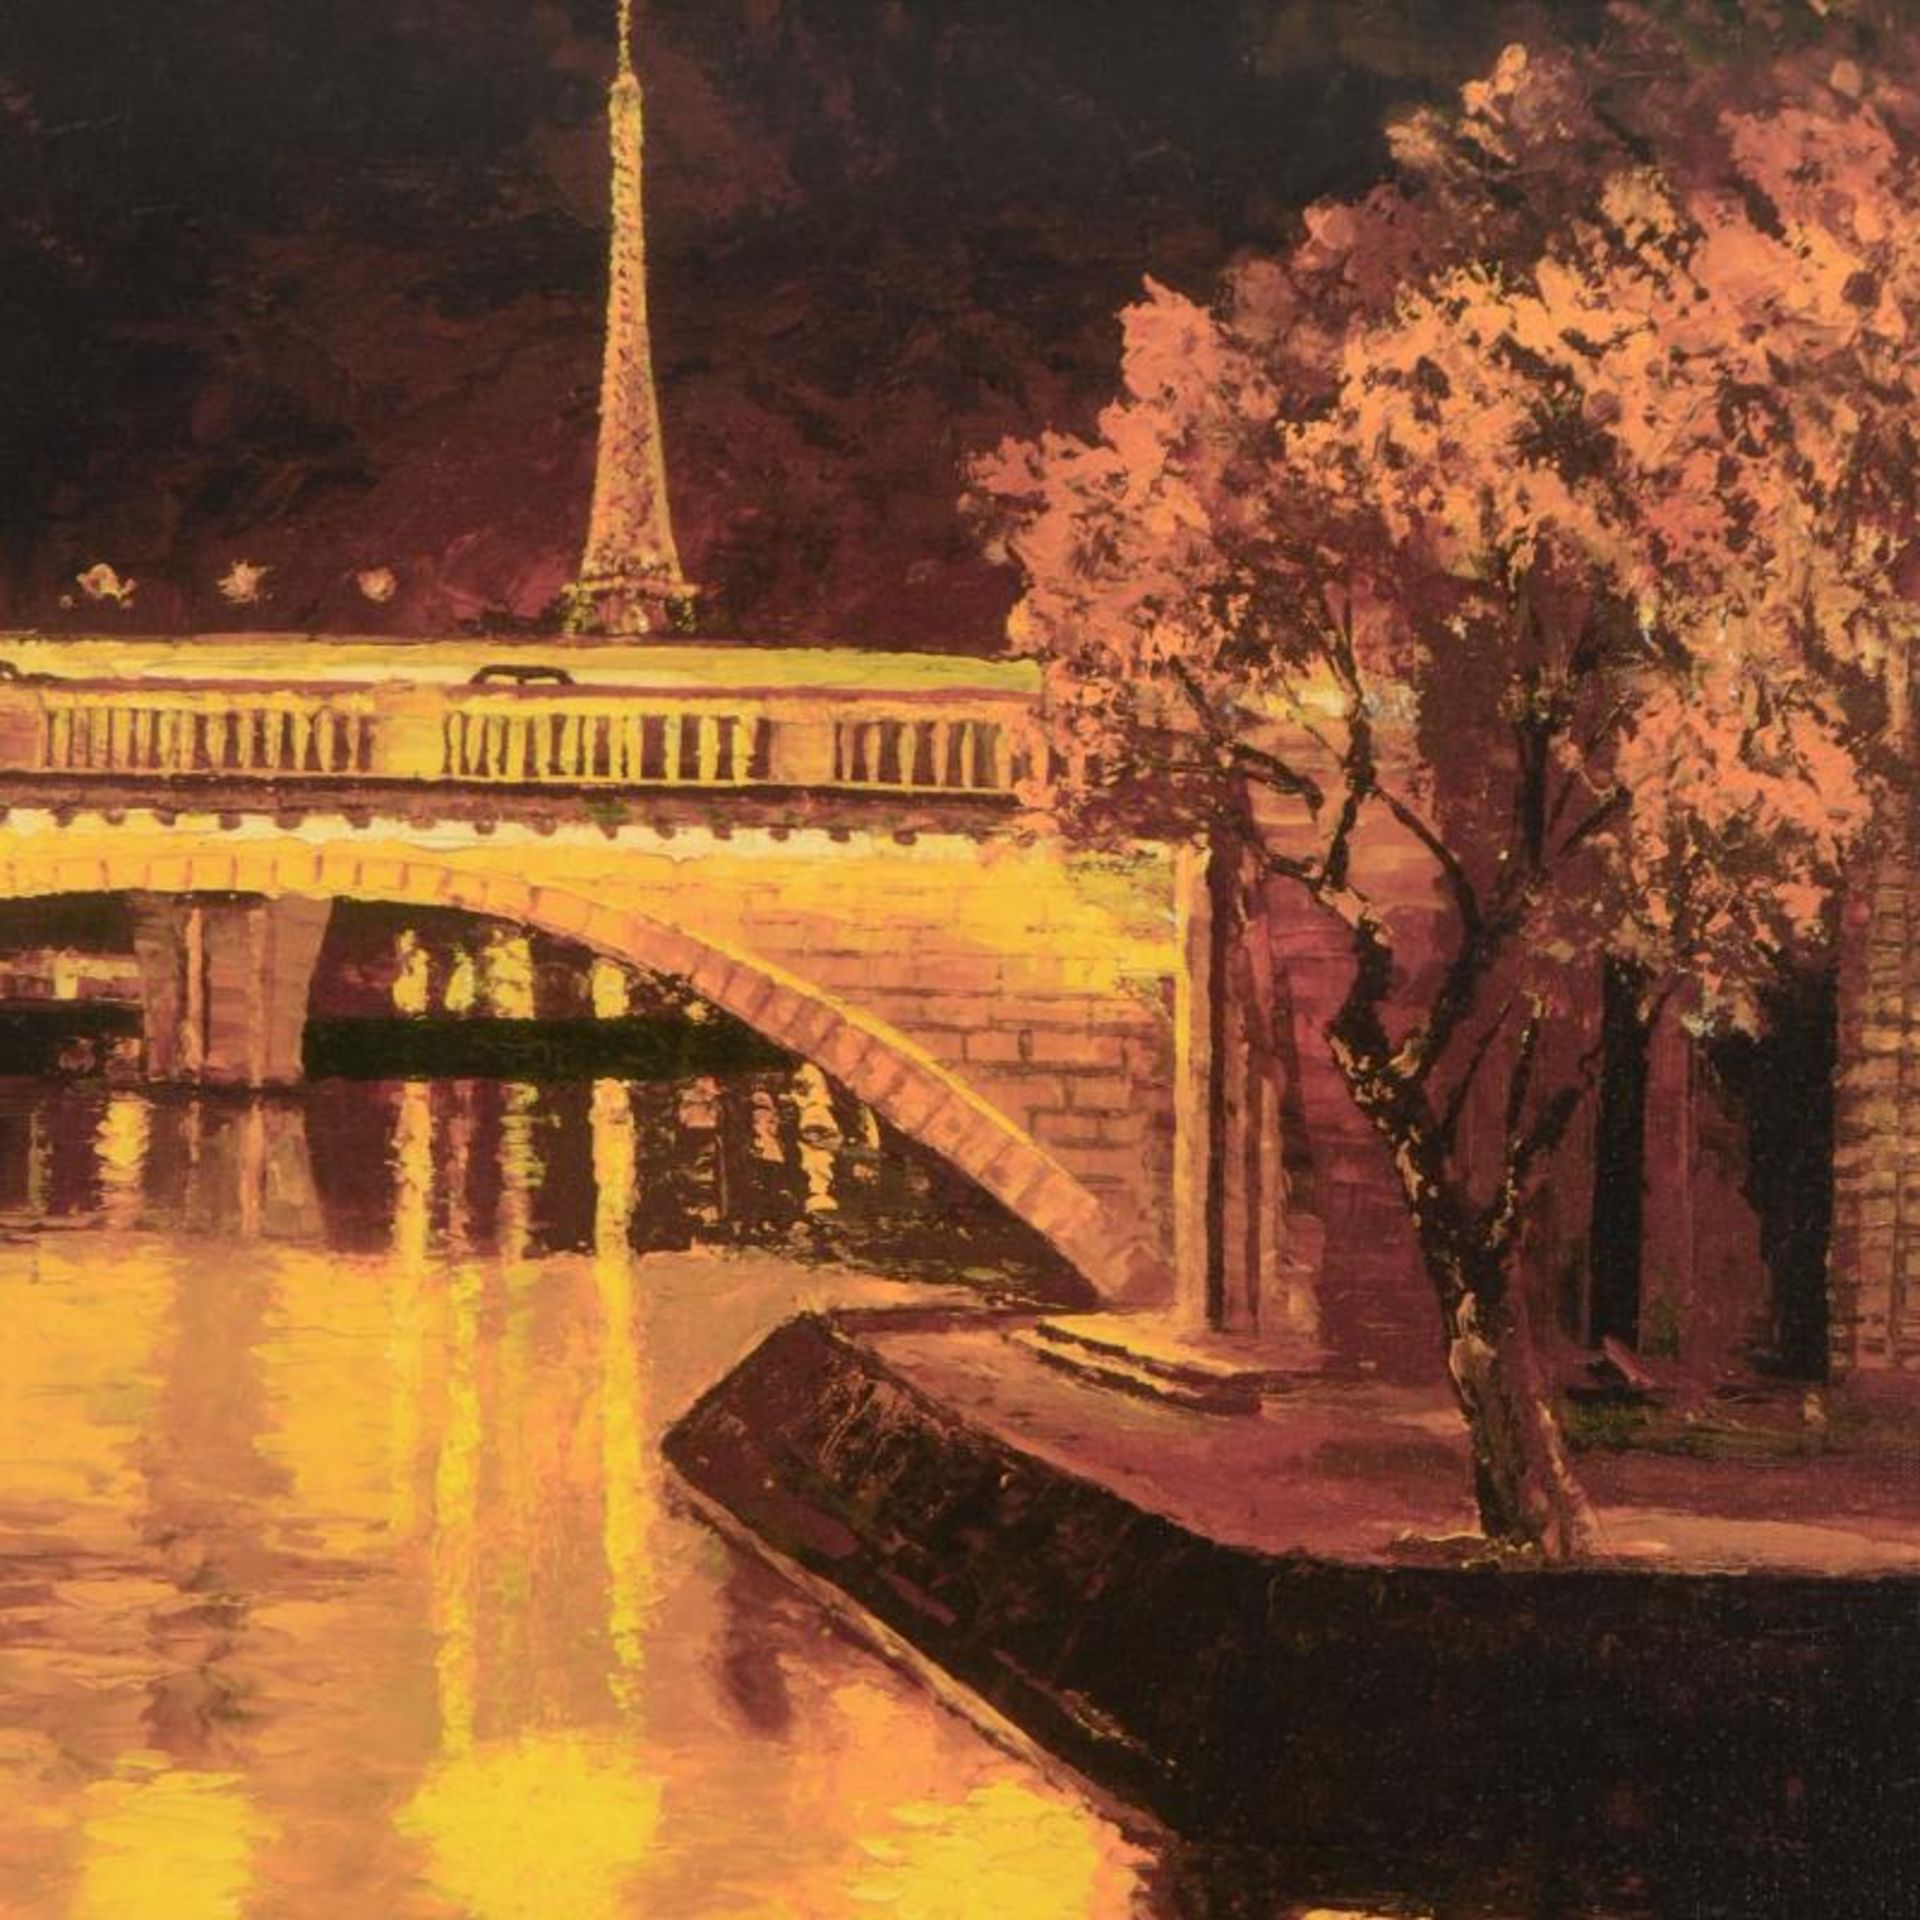 Twilight On The Seine I by Behrens (1933-2014) - Image 2 of 2